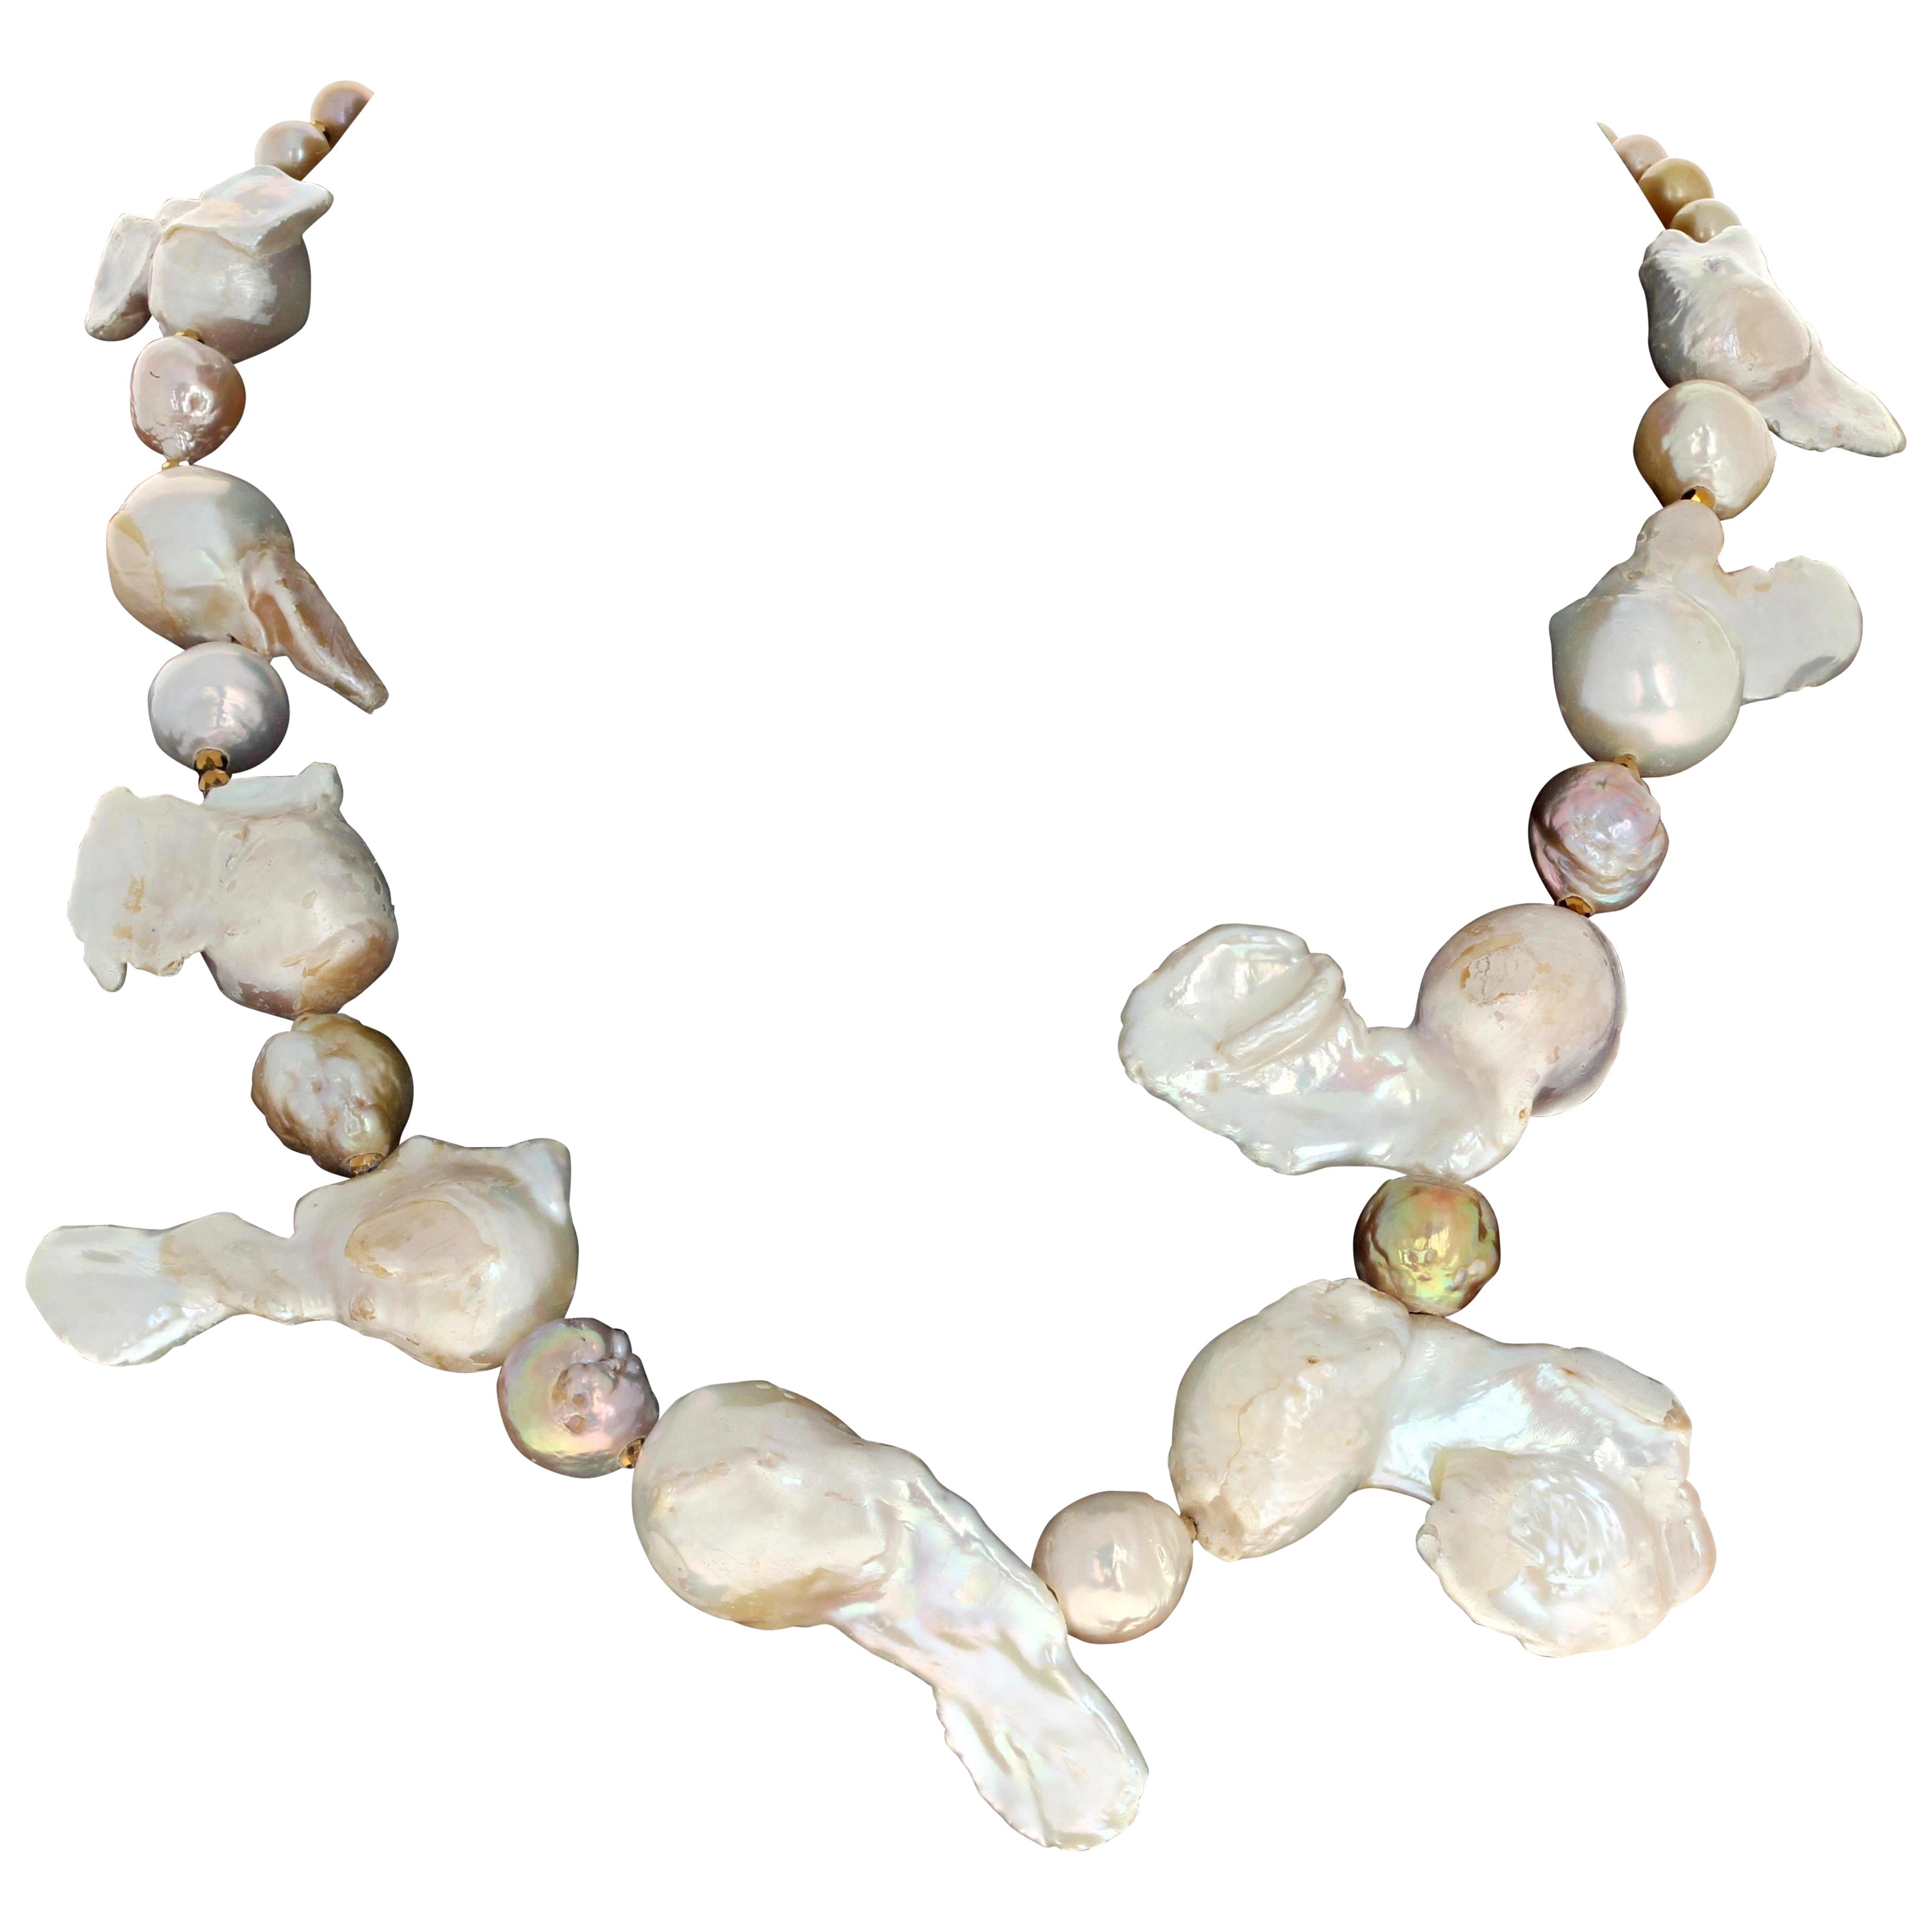 This fascinating necklace is 18 1/2 inches long.  The Pearls are natural just the way they grew so oddly dramatic in their natural shells.  The round parts are approximately 18mm ant they are about 40mm long.  The smaller little Pearls are